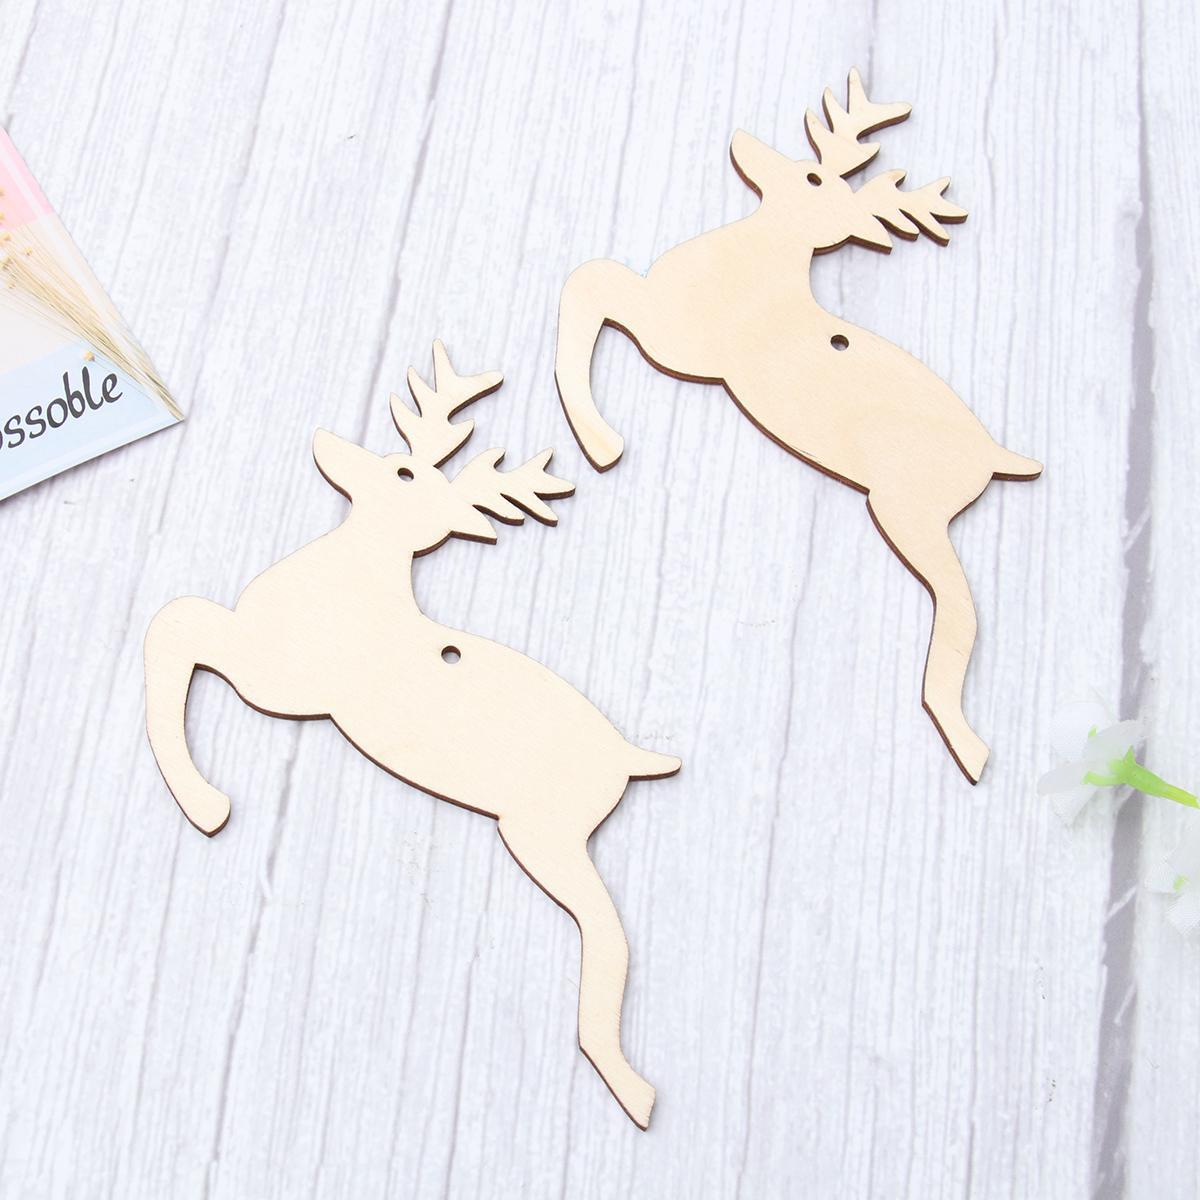 10pcs Wooden Chip Christmas Reindeer Wood Ornaments Creative Accessories Unfinished Wood Ornaments for DIY Christmas Hanging Decoration